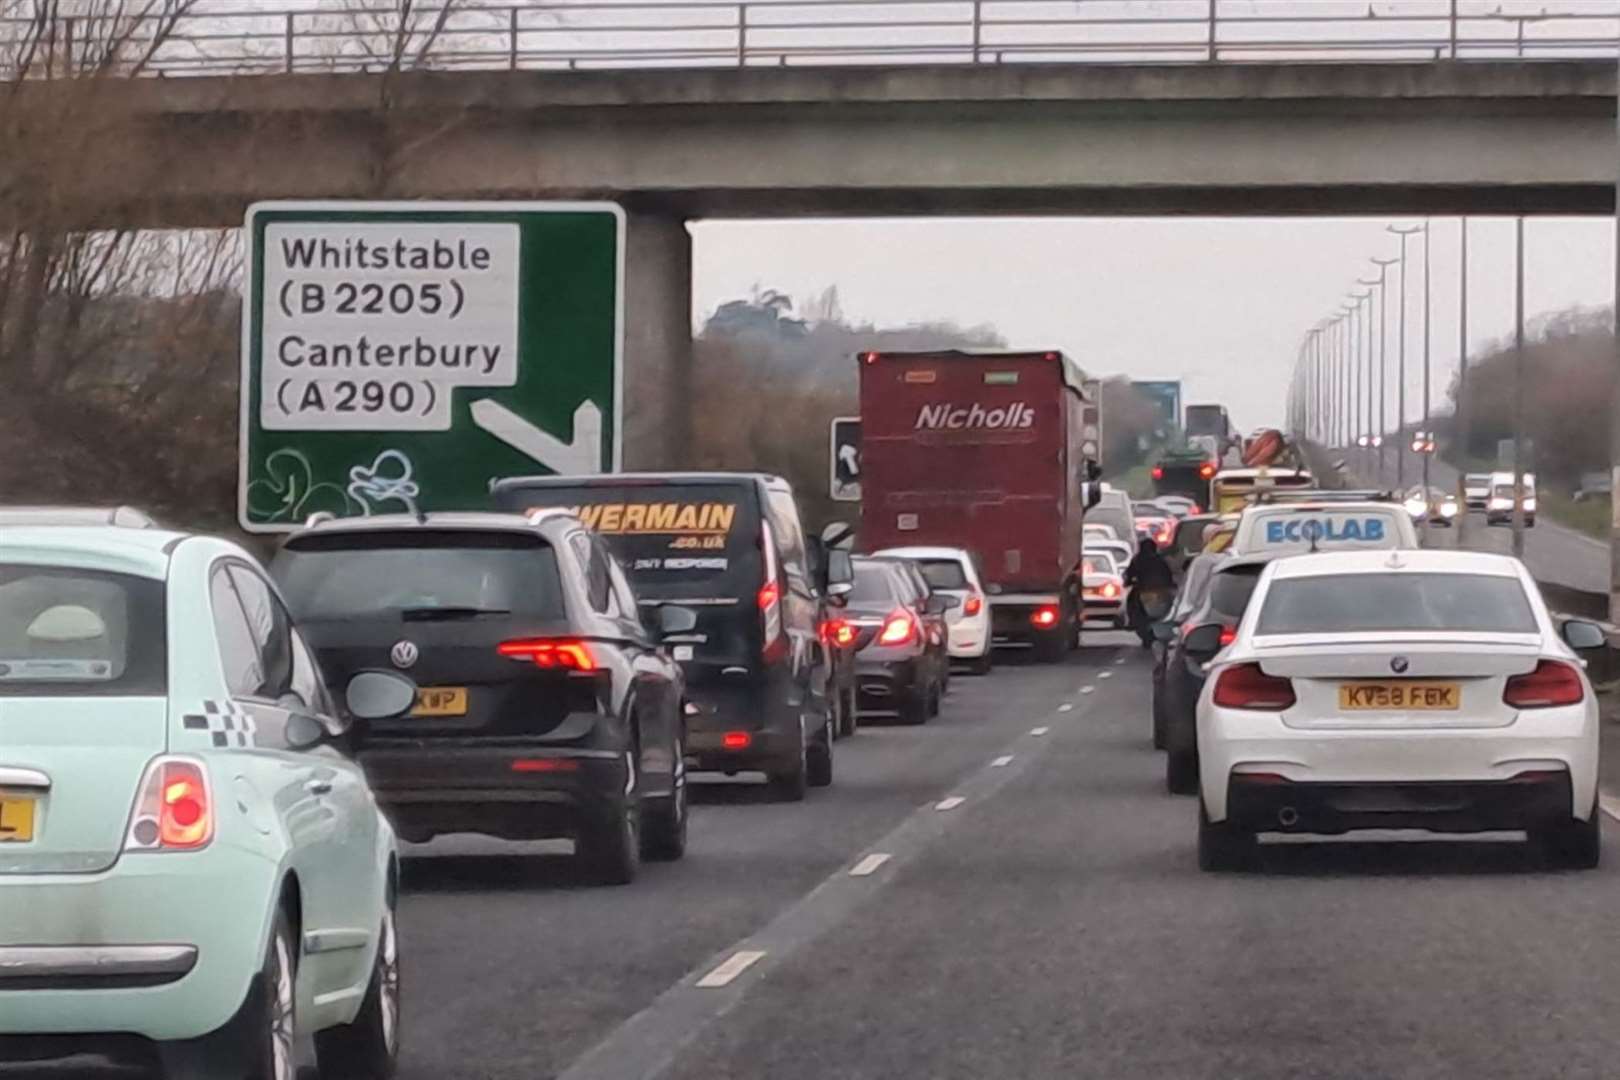 Traffic is stationary on the A229 southbound near Dargate, between Whitstable and Faversham